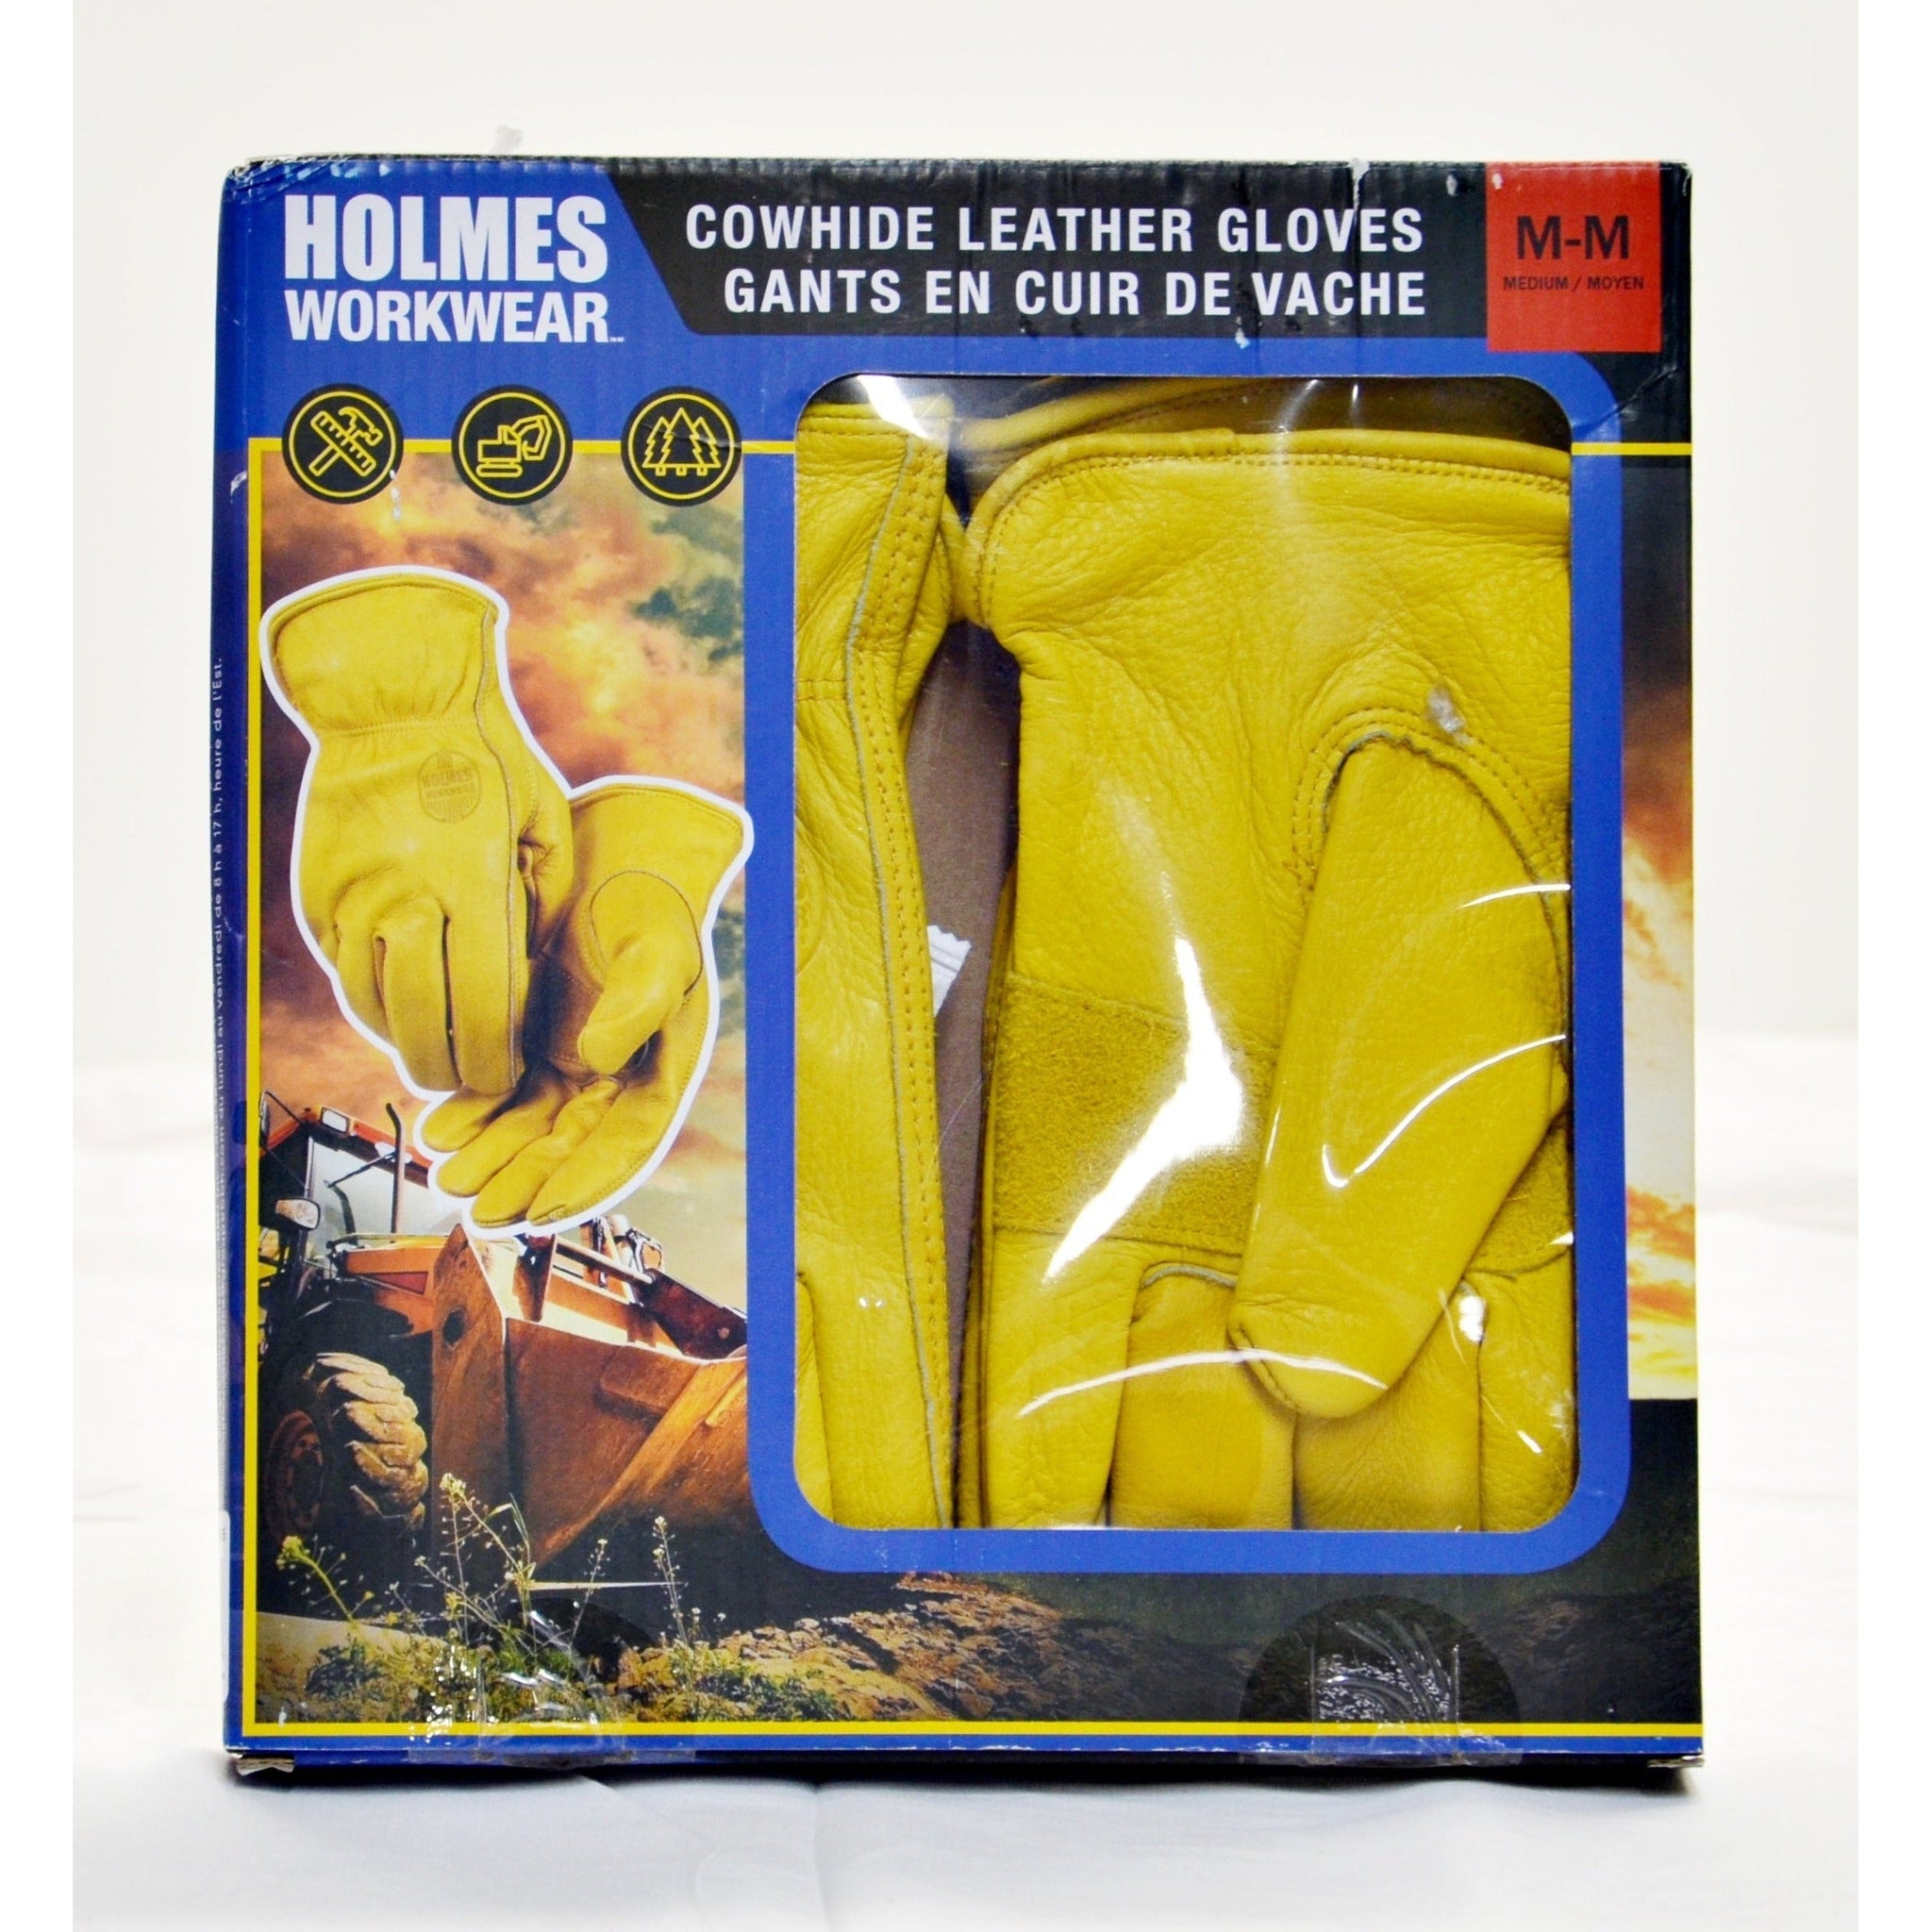 Holmes Off-White Leather Gloves for Men - Large